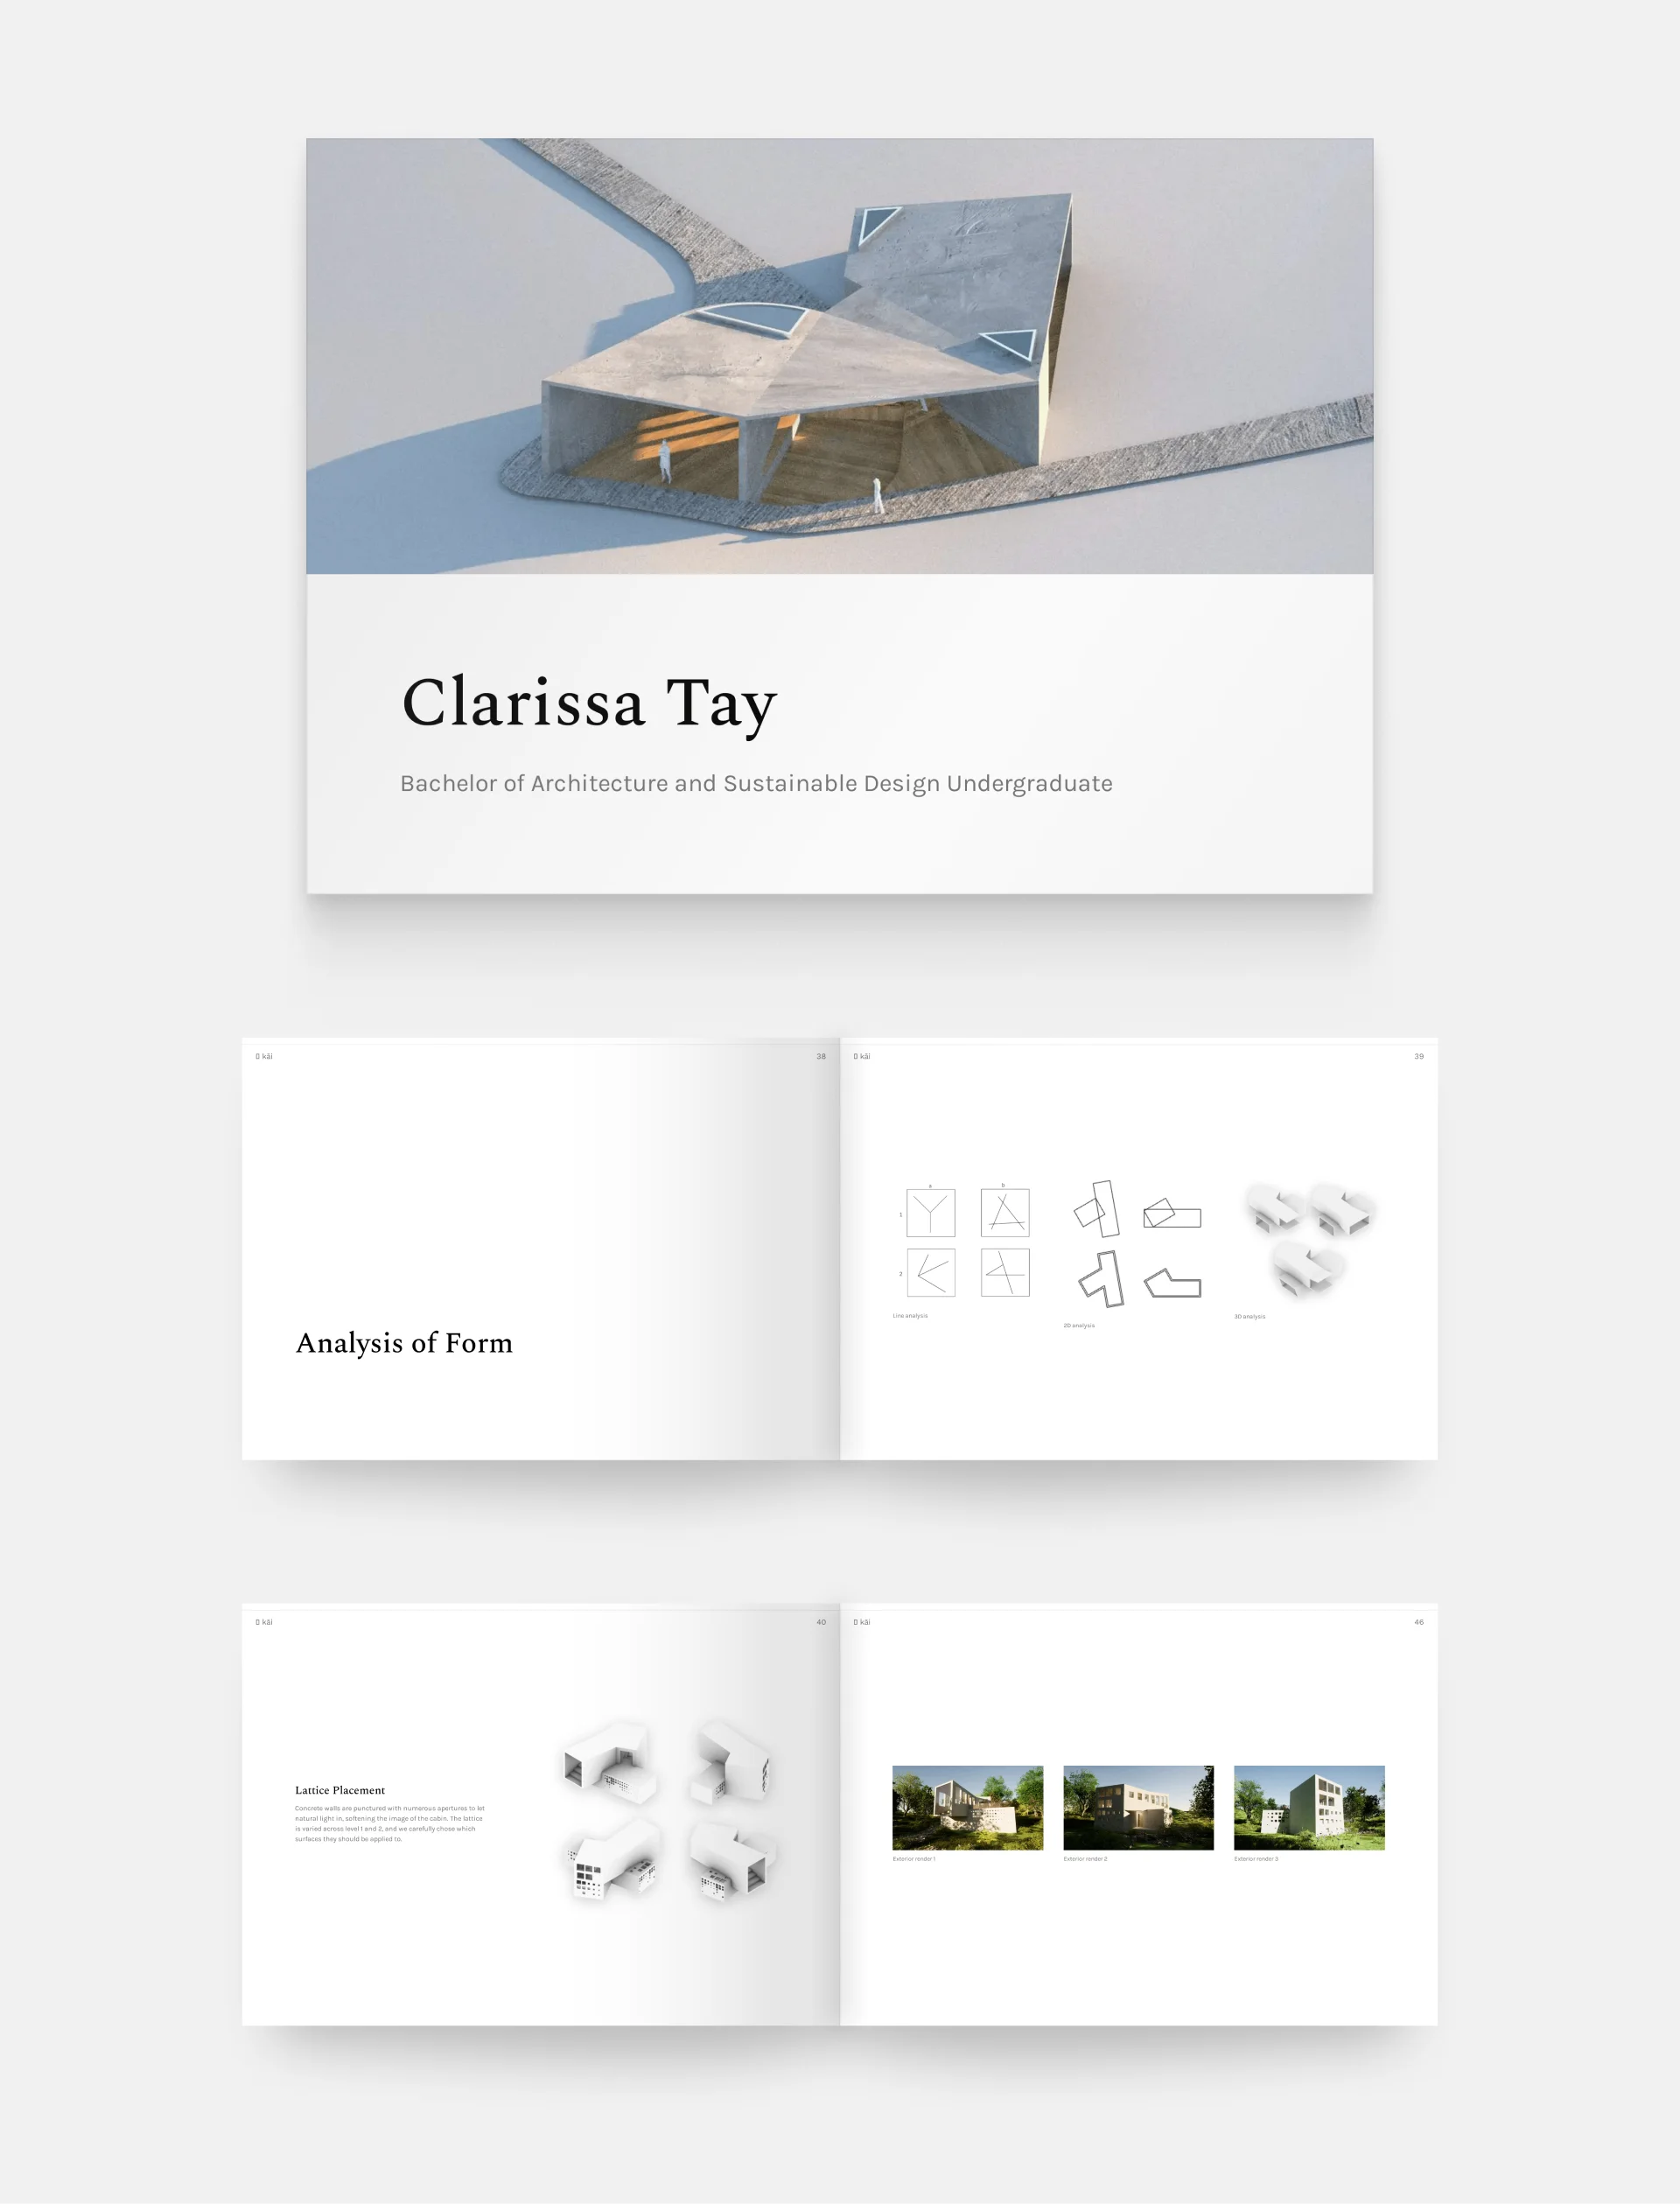 The PDF view of Clarissa Tay's architecture portfolio (from top to bottom: cover, projects, renders)